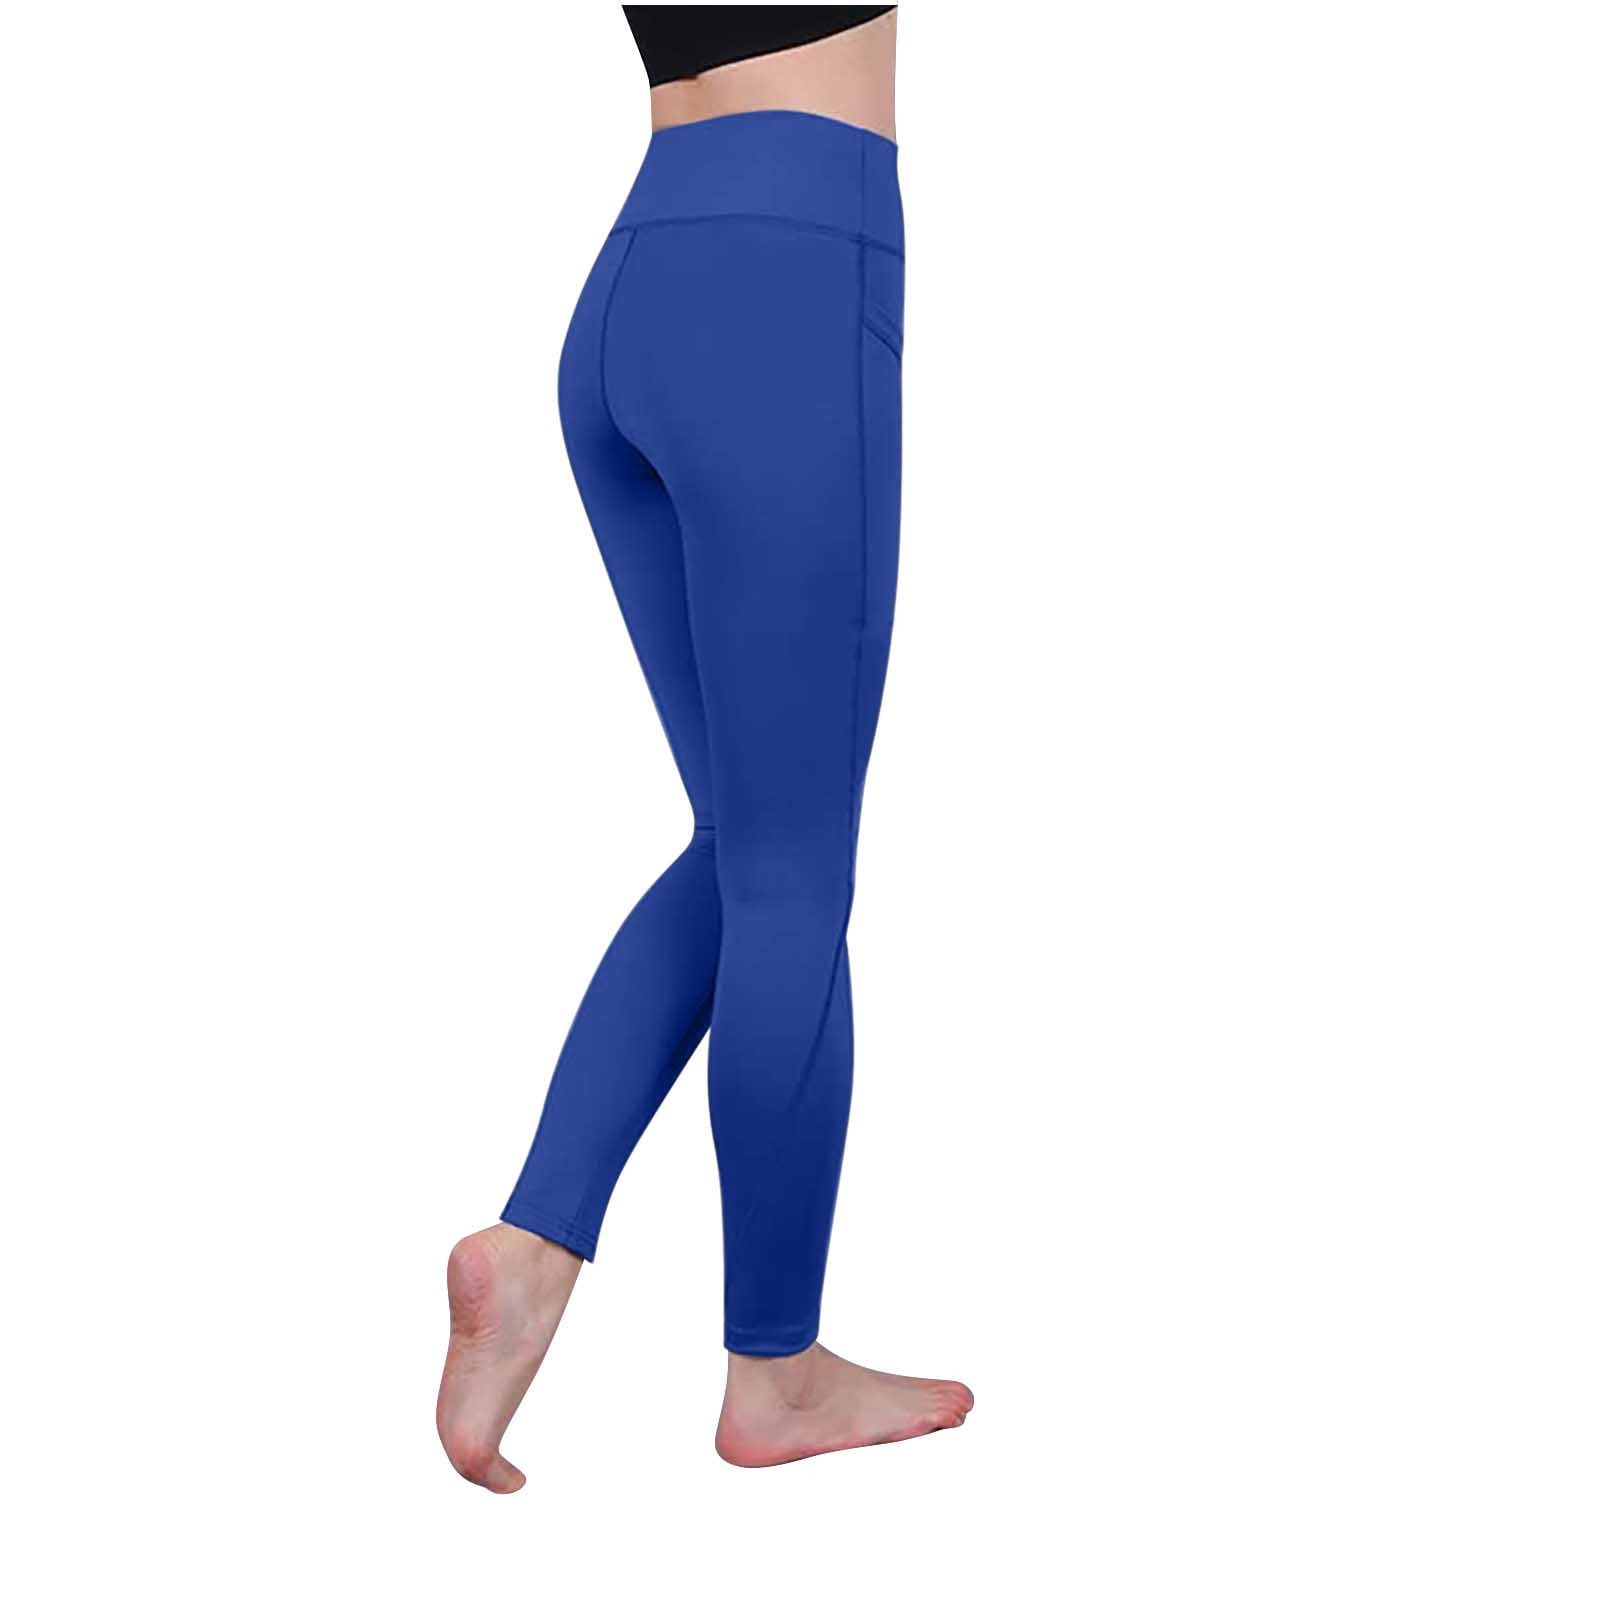 Melody high waist leggings for fitness women cotton spandex sports legging  extra firm compression shapewear